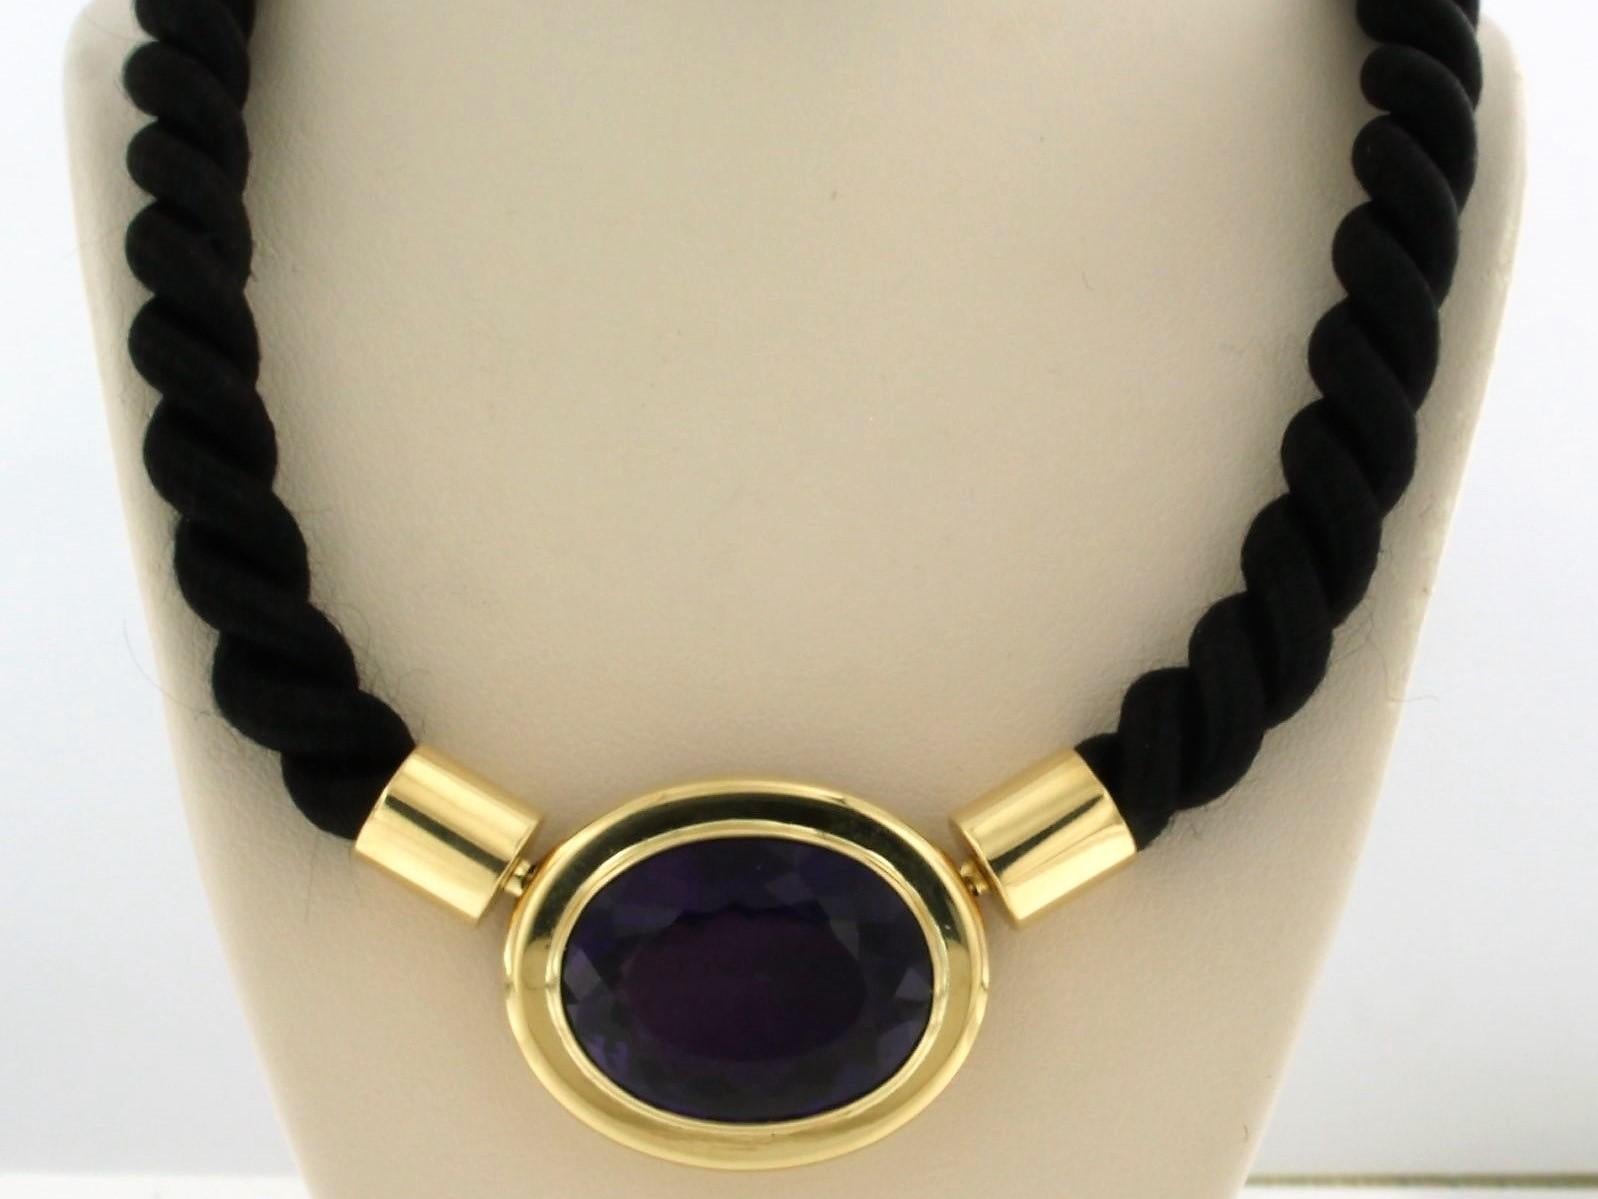 18k yellow gold clasp set with an amethyst on a black rope necklace - 42 cm long

detailed description:

the necklace is 42 cm long and 7.7 mm wide

dimensions of the lock are 3.0 cm long by 2.4 cm wide

weight 28.4 grams

occupied with

- 1 x 2.4